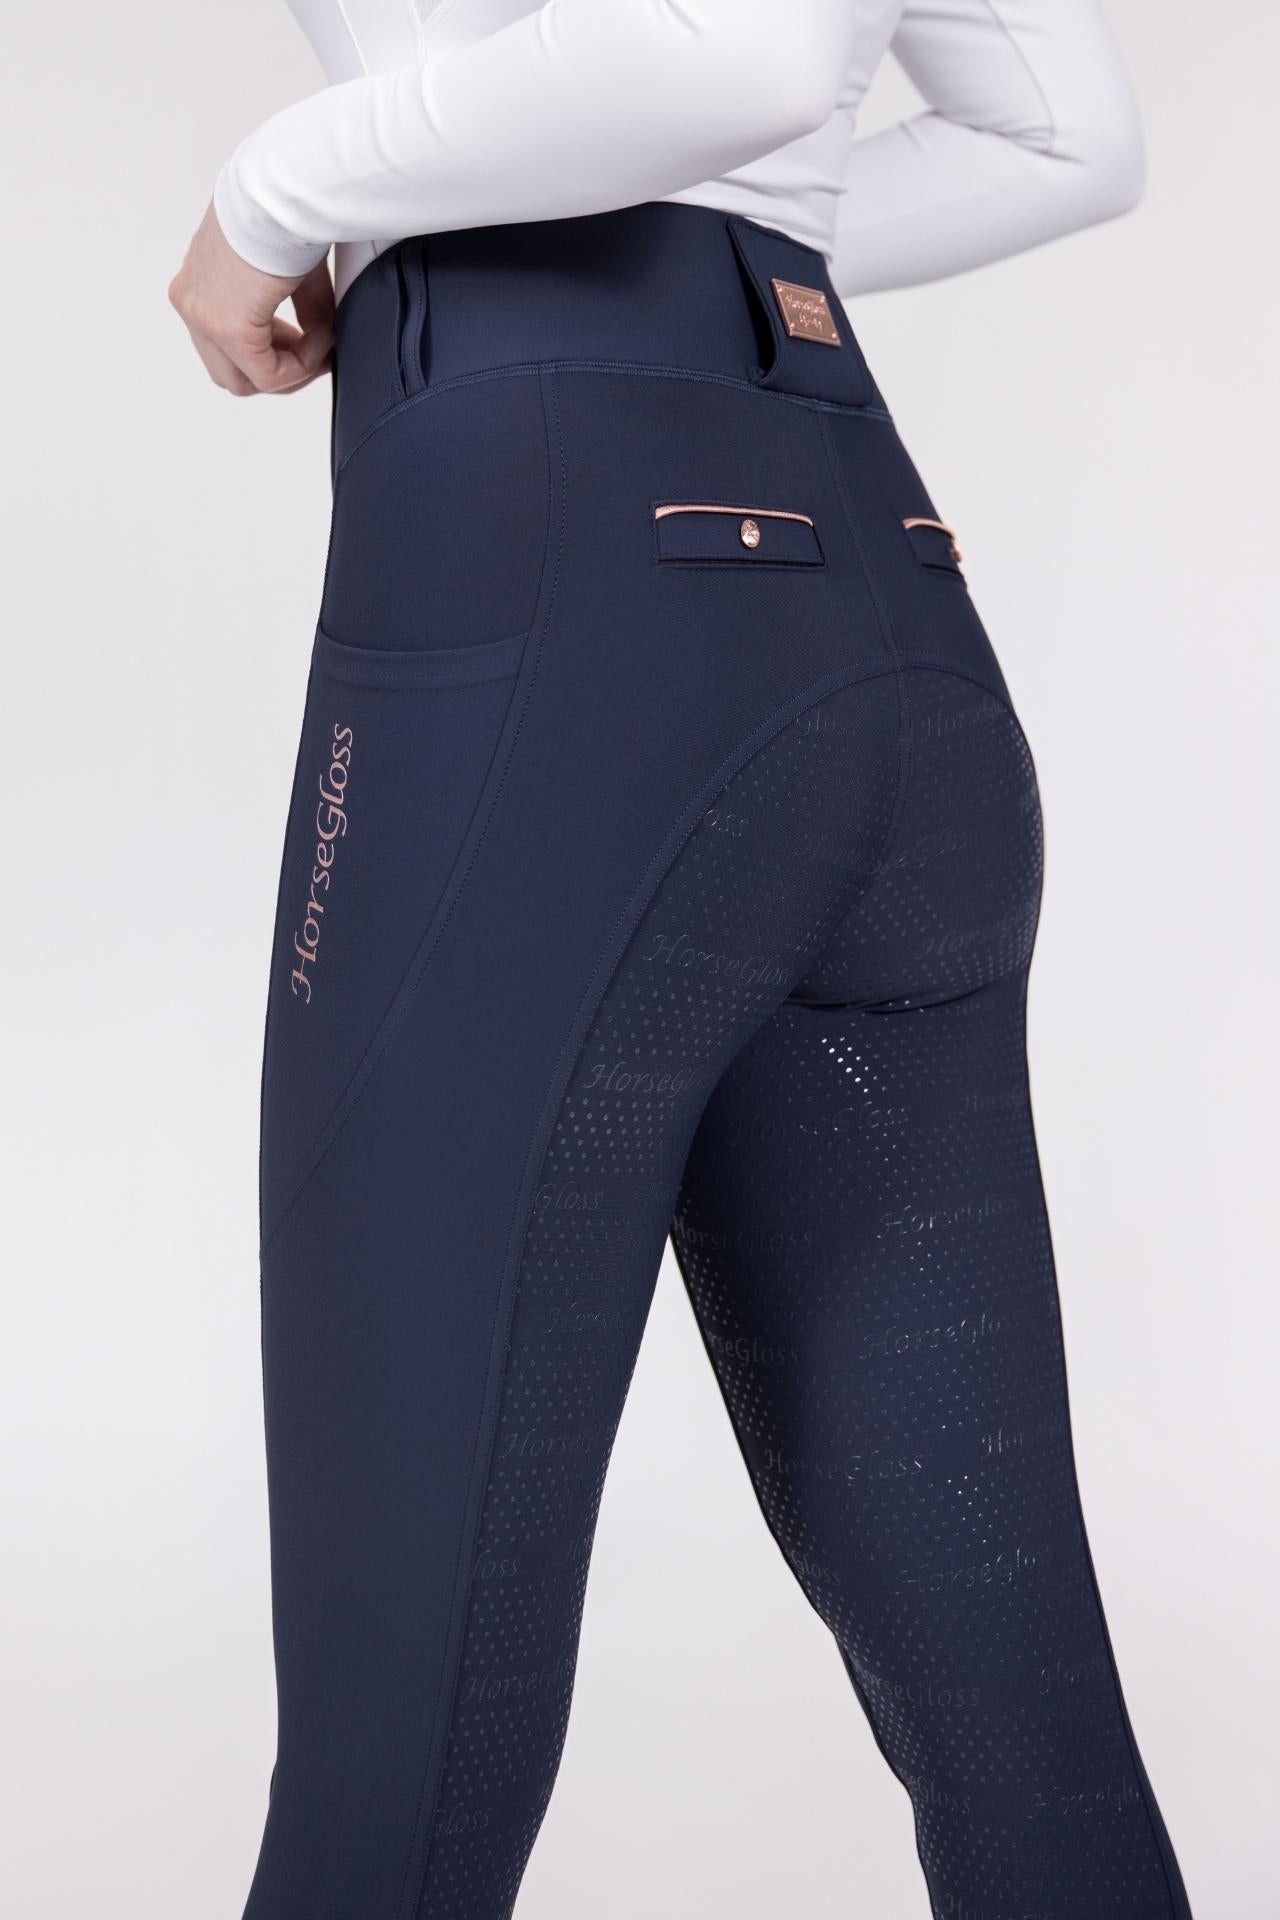 KYLIE - RIDING LEGGINGS  NAVY ''ROSE GOLD'' FULL SEAT SILICONE – HorseGloss